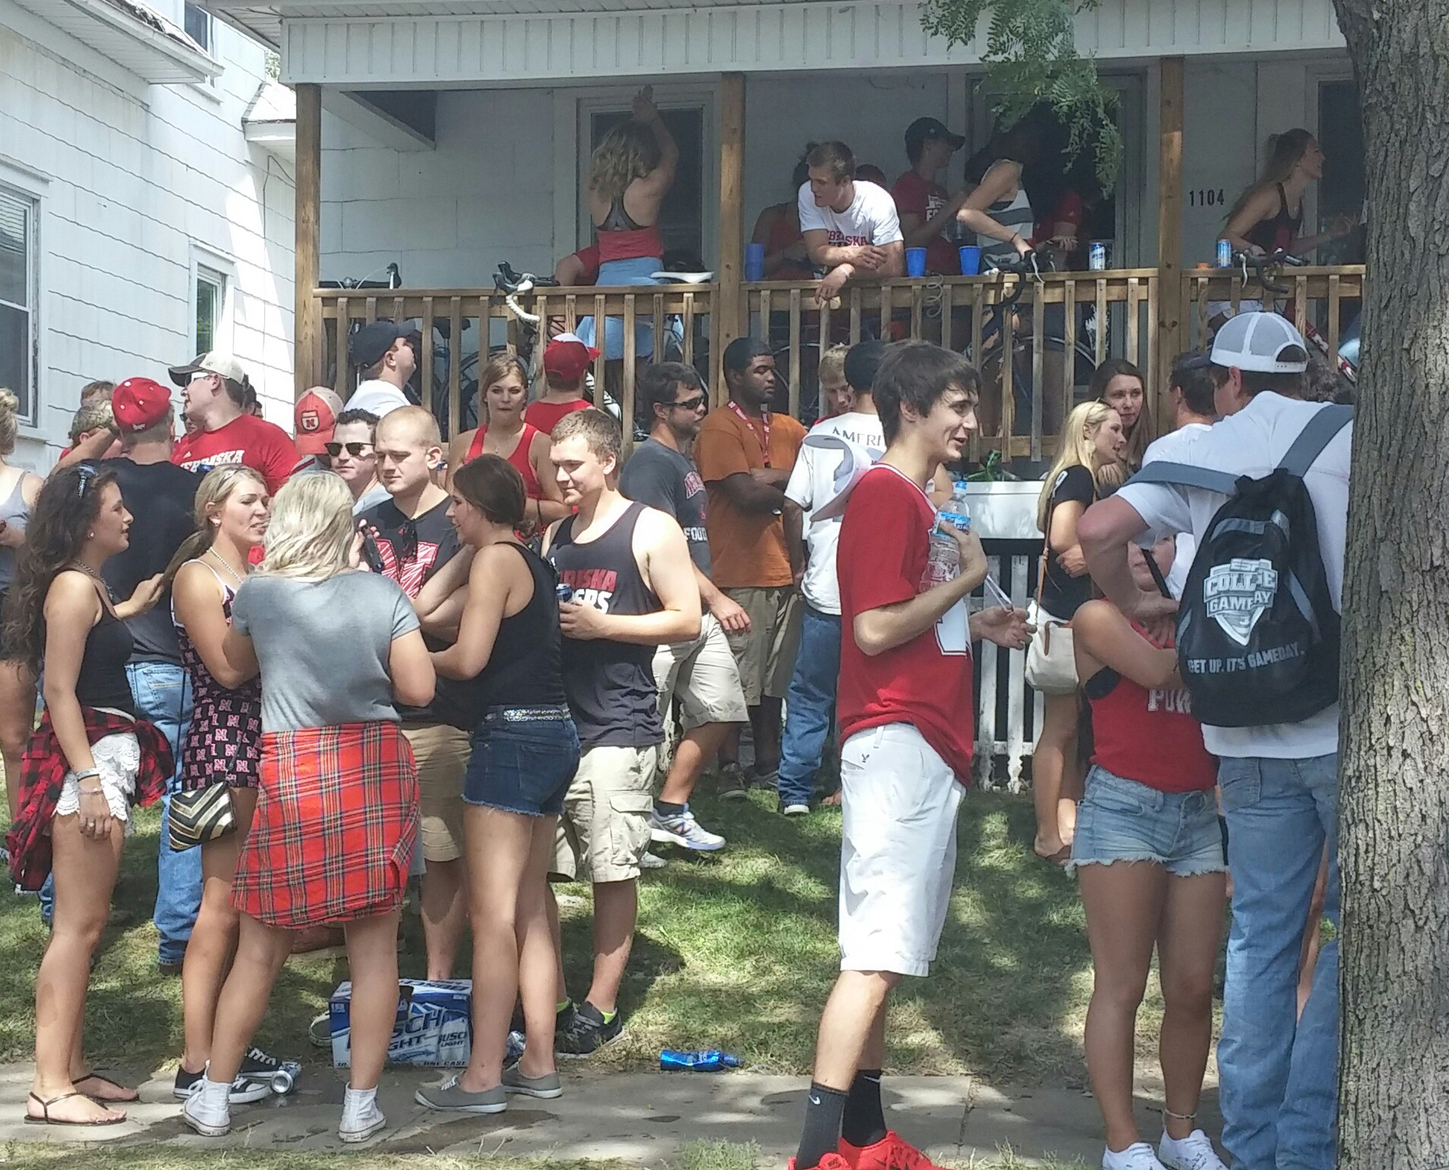 Students party on the lawn and porch of a home in the North Bottoms. Police ultimately shut down this party. (Bridge photo by Mike Wilkinson)